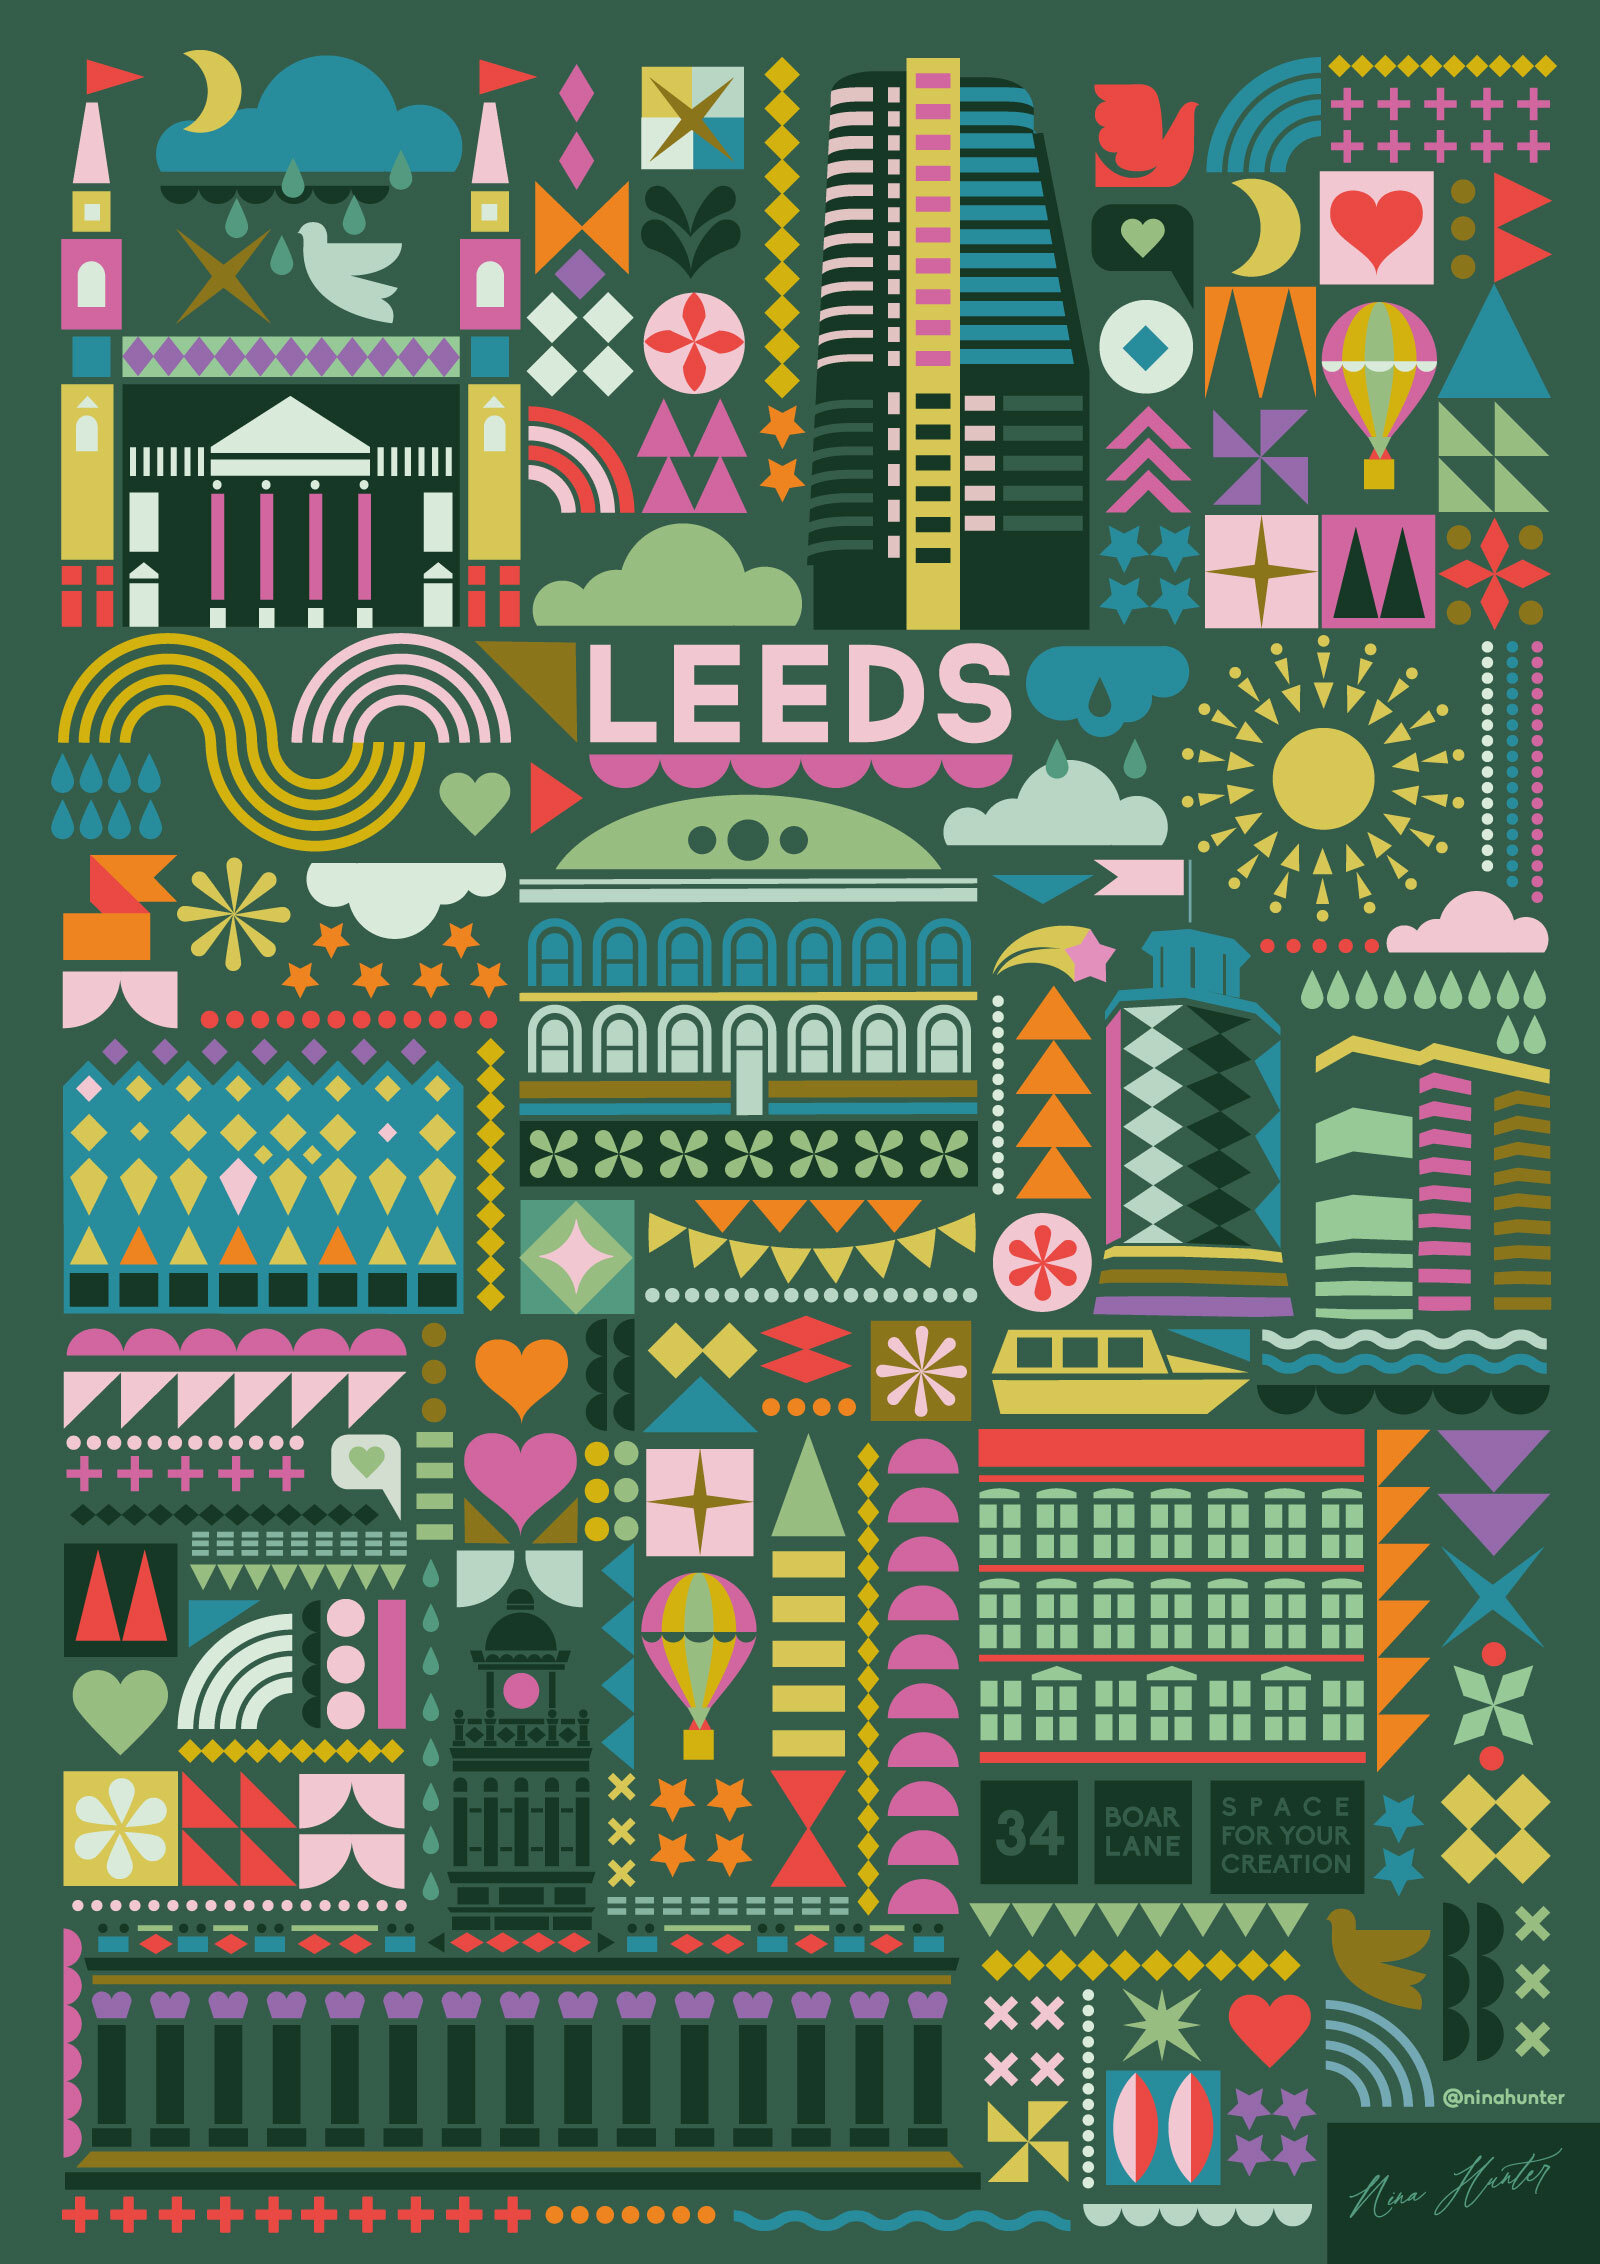 Leeds - space for your creation